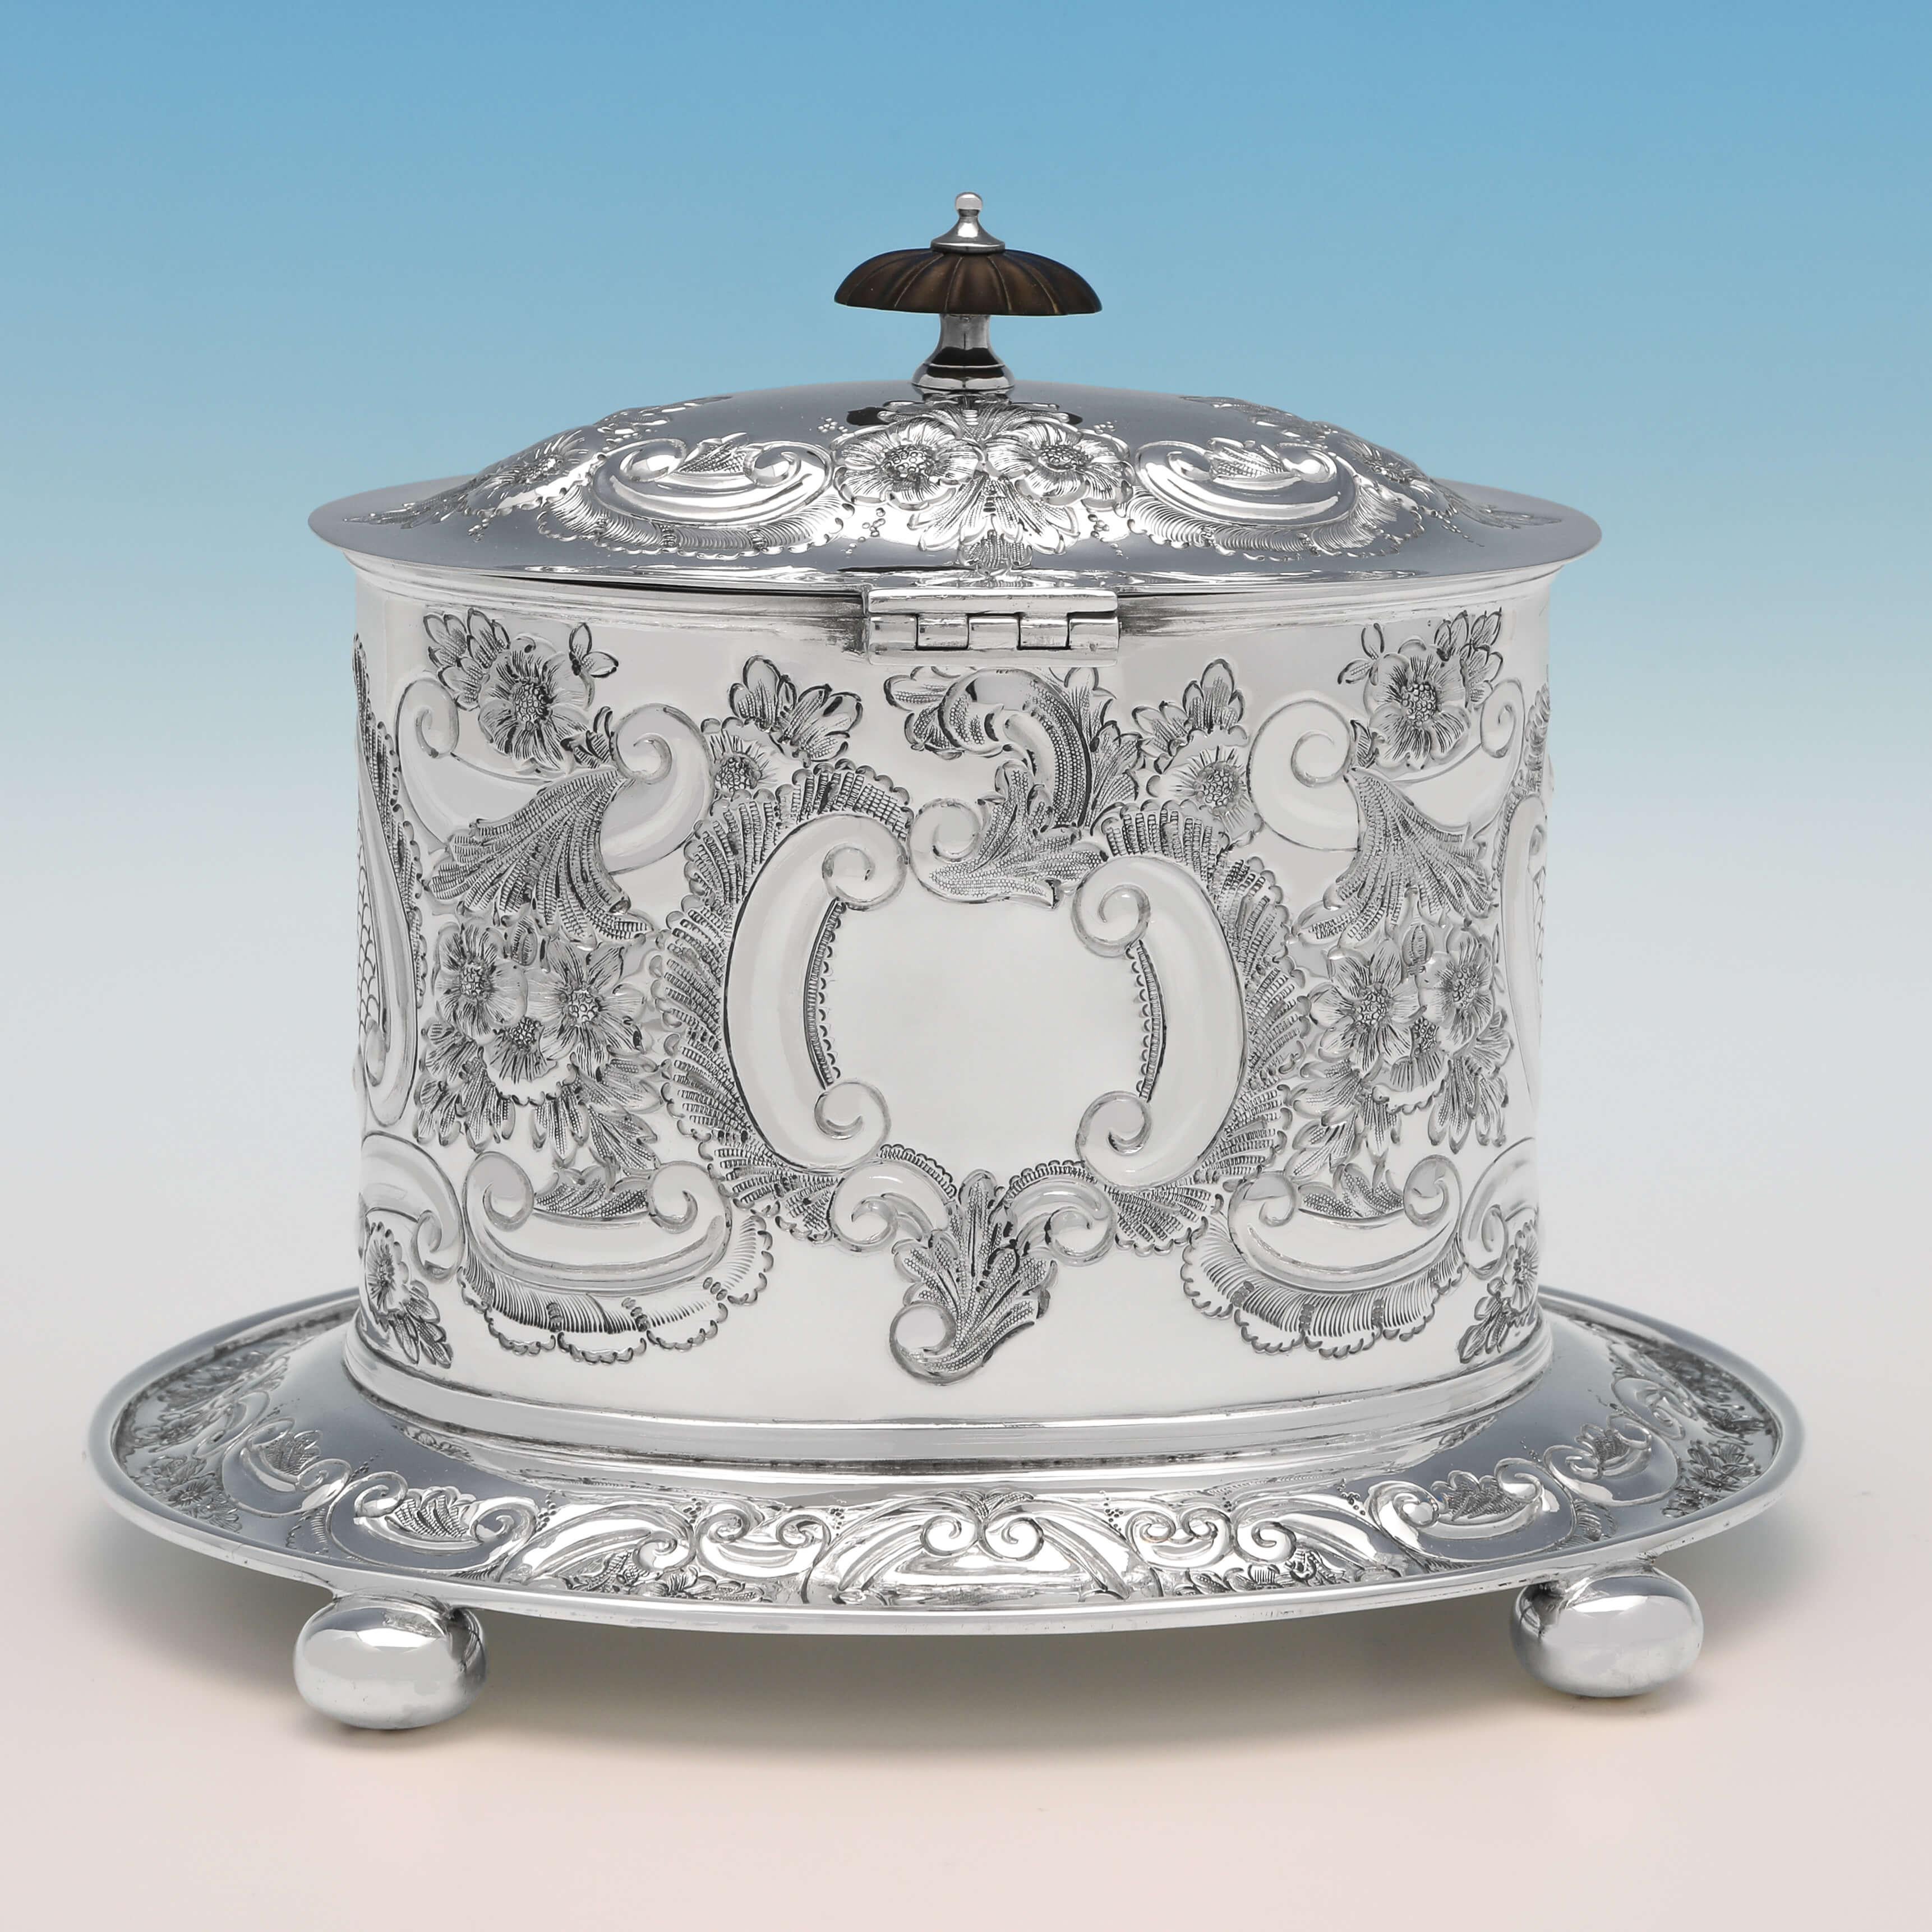 Hallmarked in Birmingham in 1901 by Thomas Latham & Ernest Morton, this very attractive, Victorian, antique sterling silver biscuit box, is oval in shape, standing on four ball feet, and featuring wonderful chased decoration throughout. The biscuit